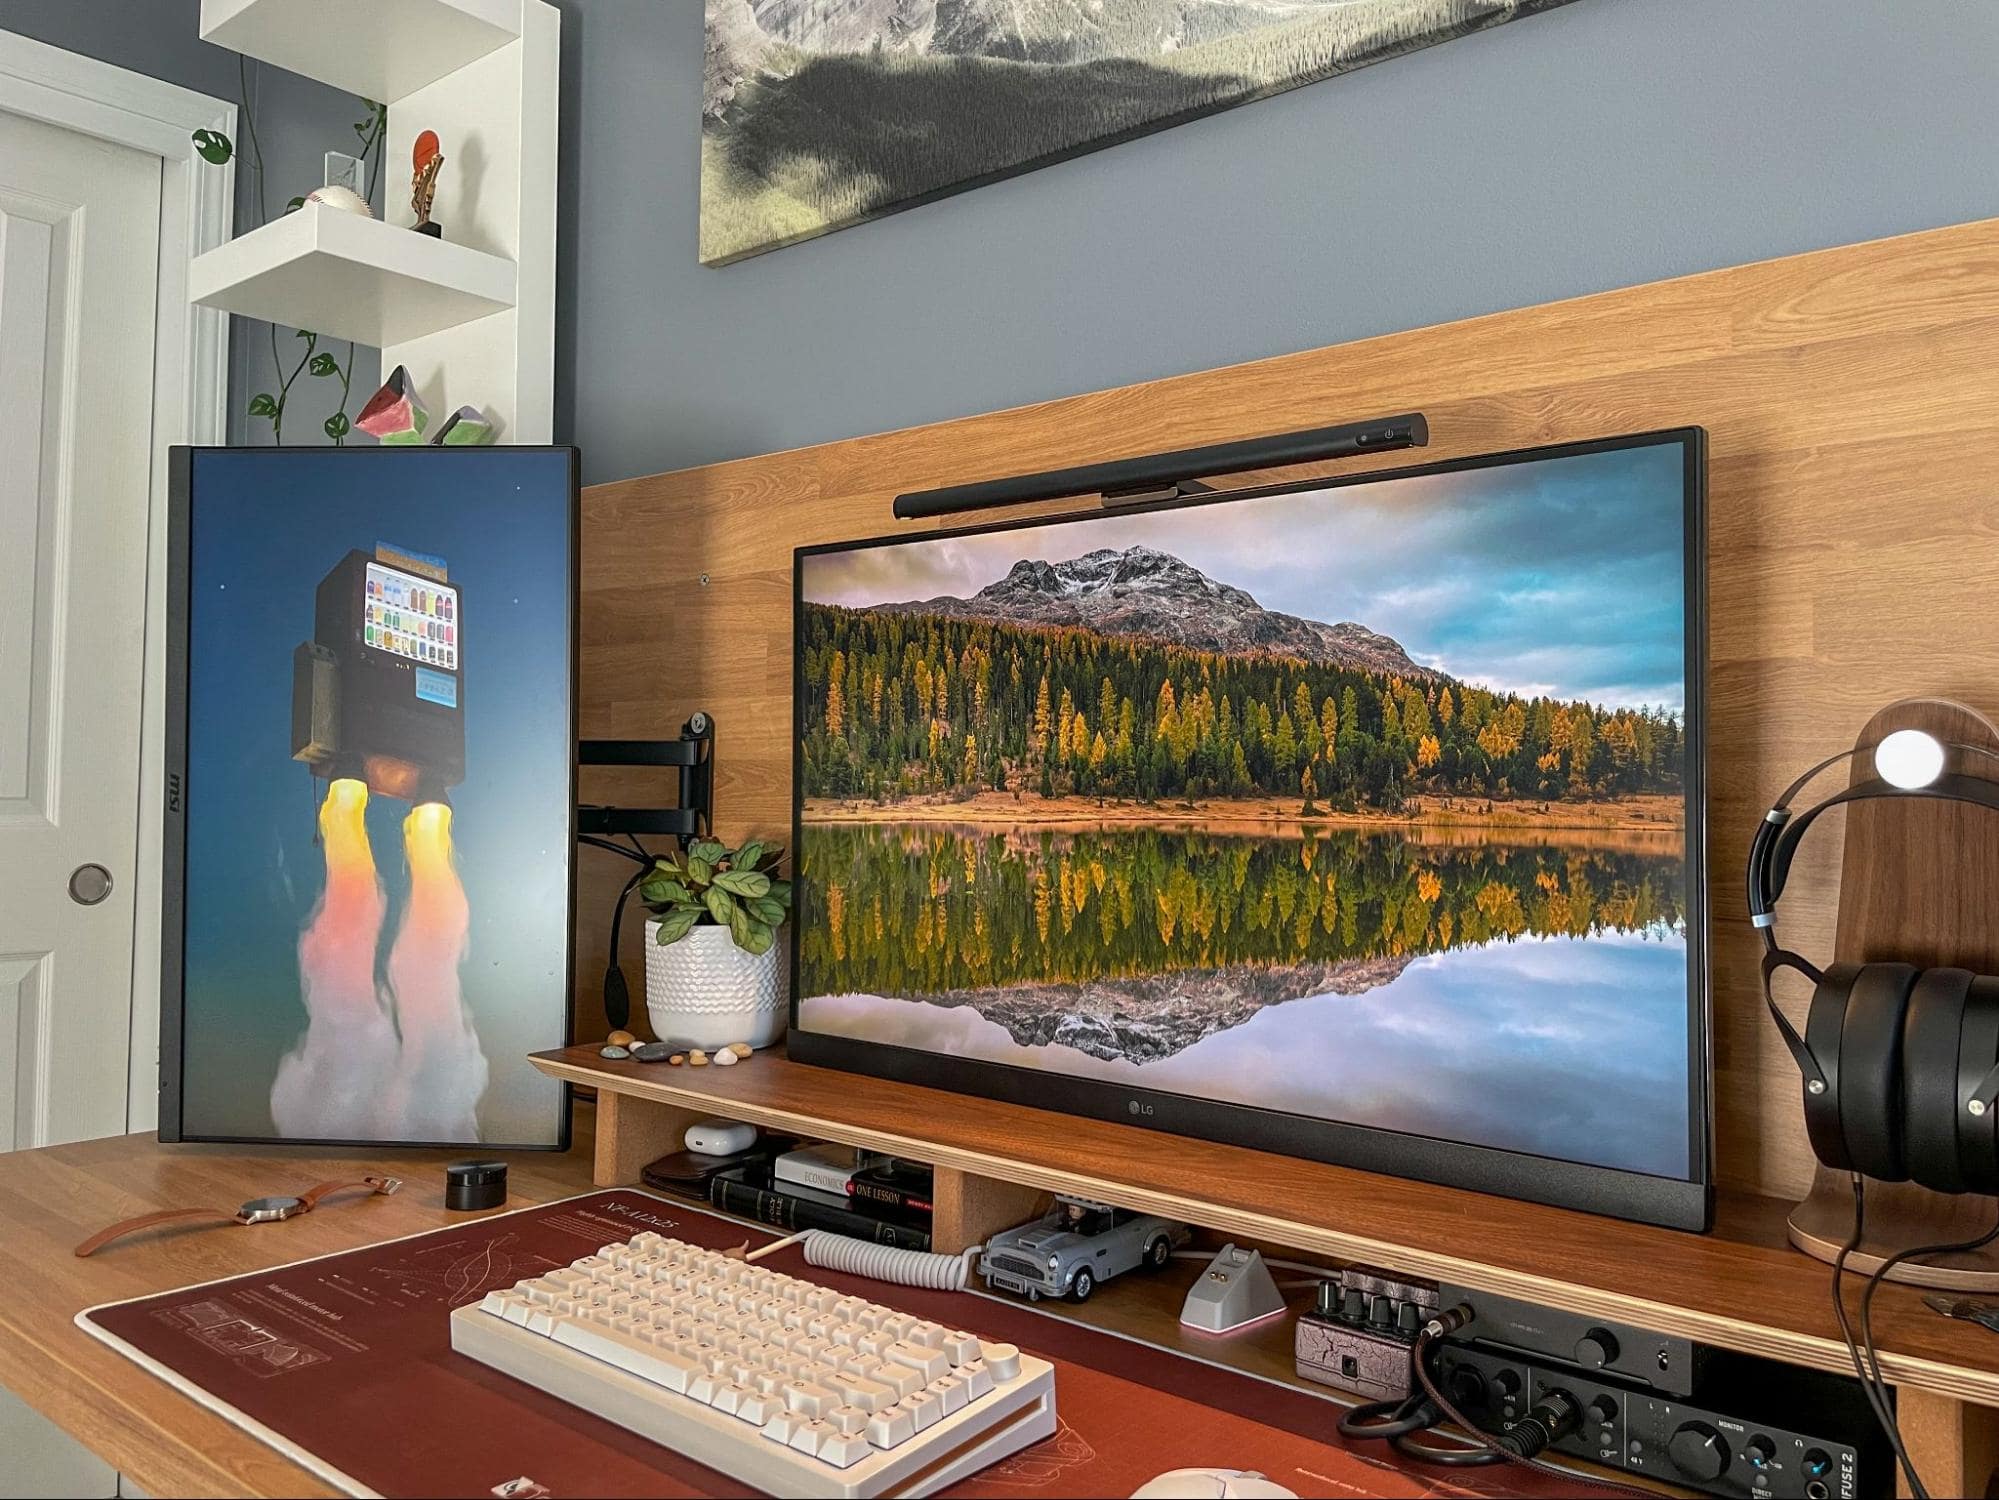 A detailed view of a home office featuring a large monitor, mechanical keyboard, and decorative items on a desk, with a scenic mountain landscape on the screen and grey walls adorned with shelves and artwork in the background